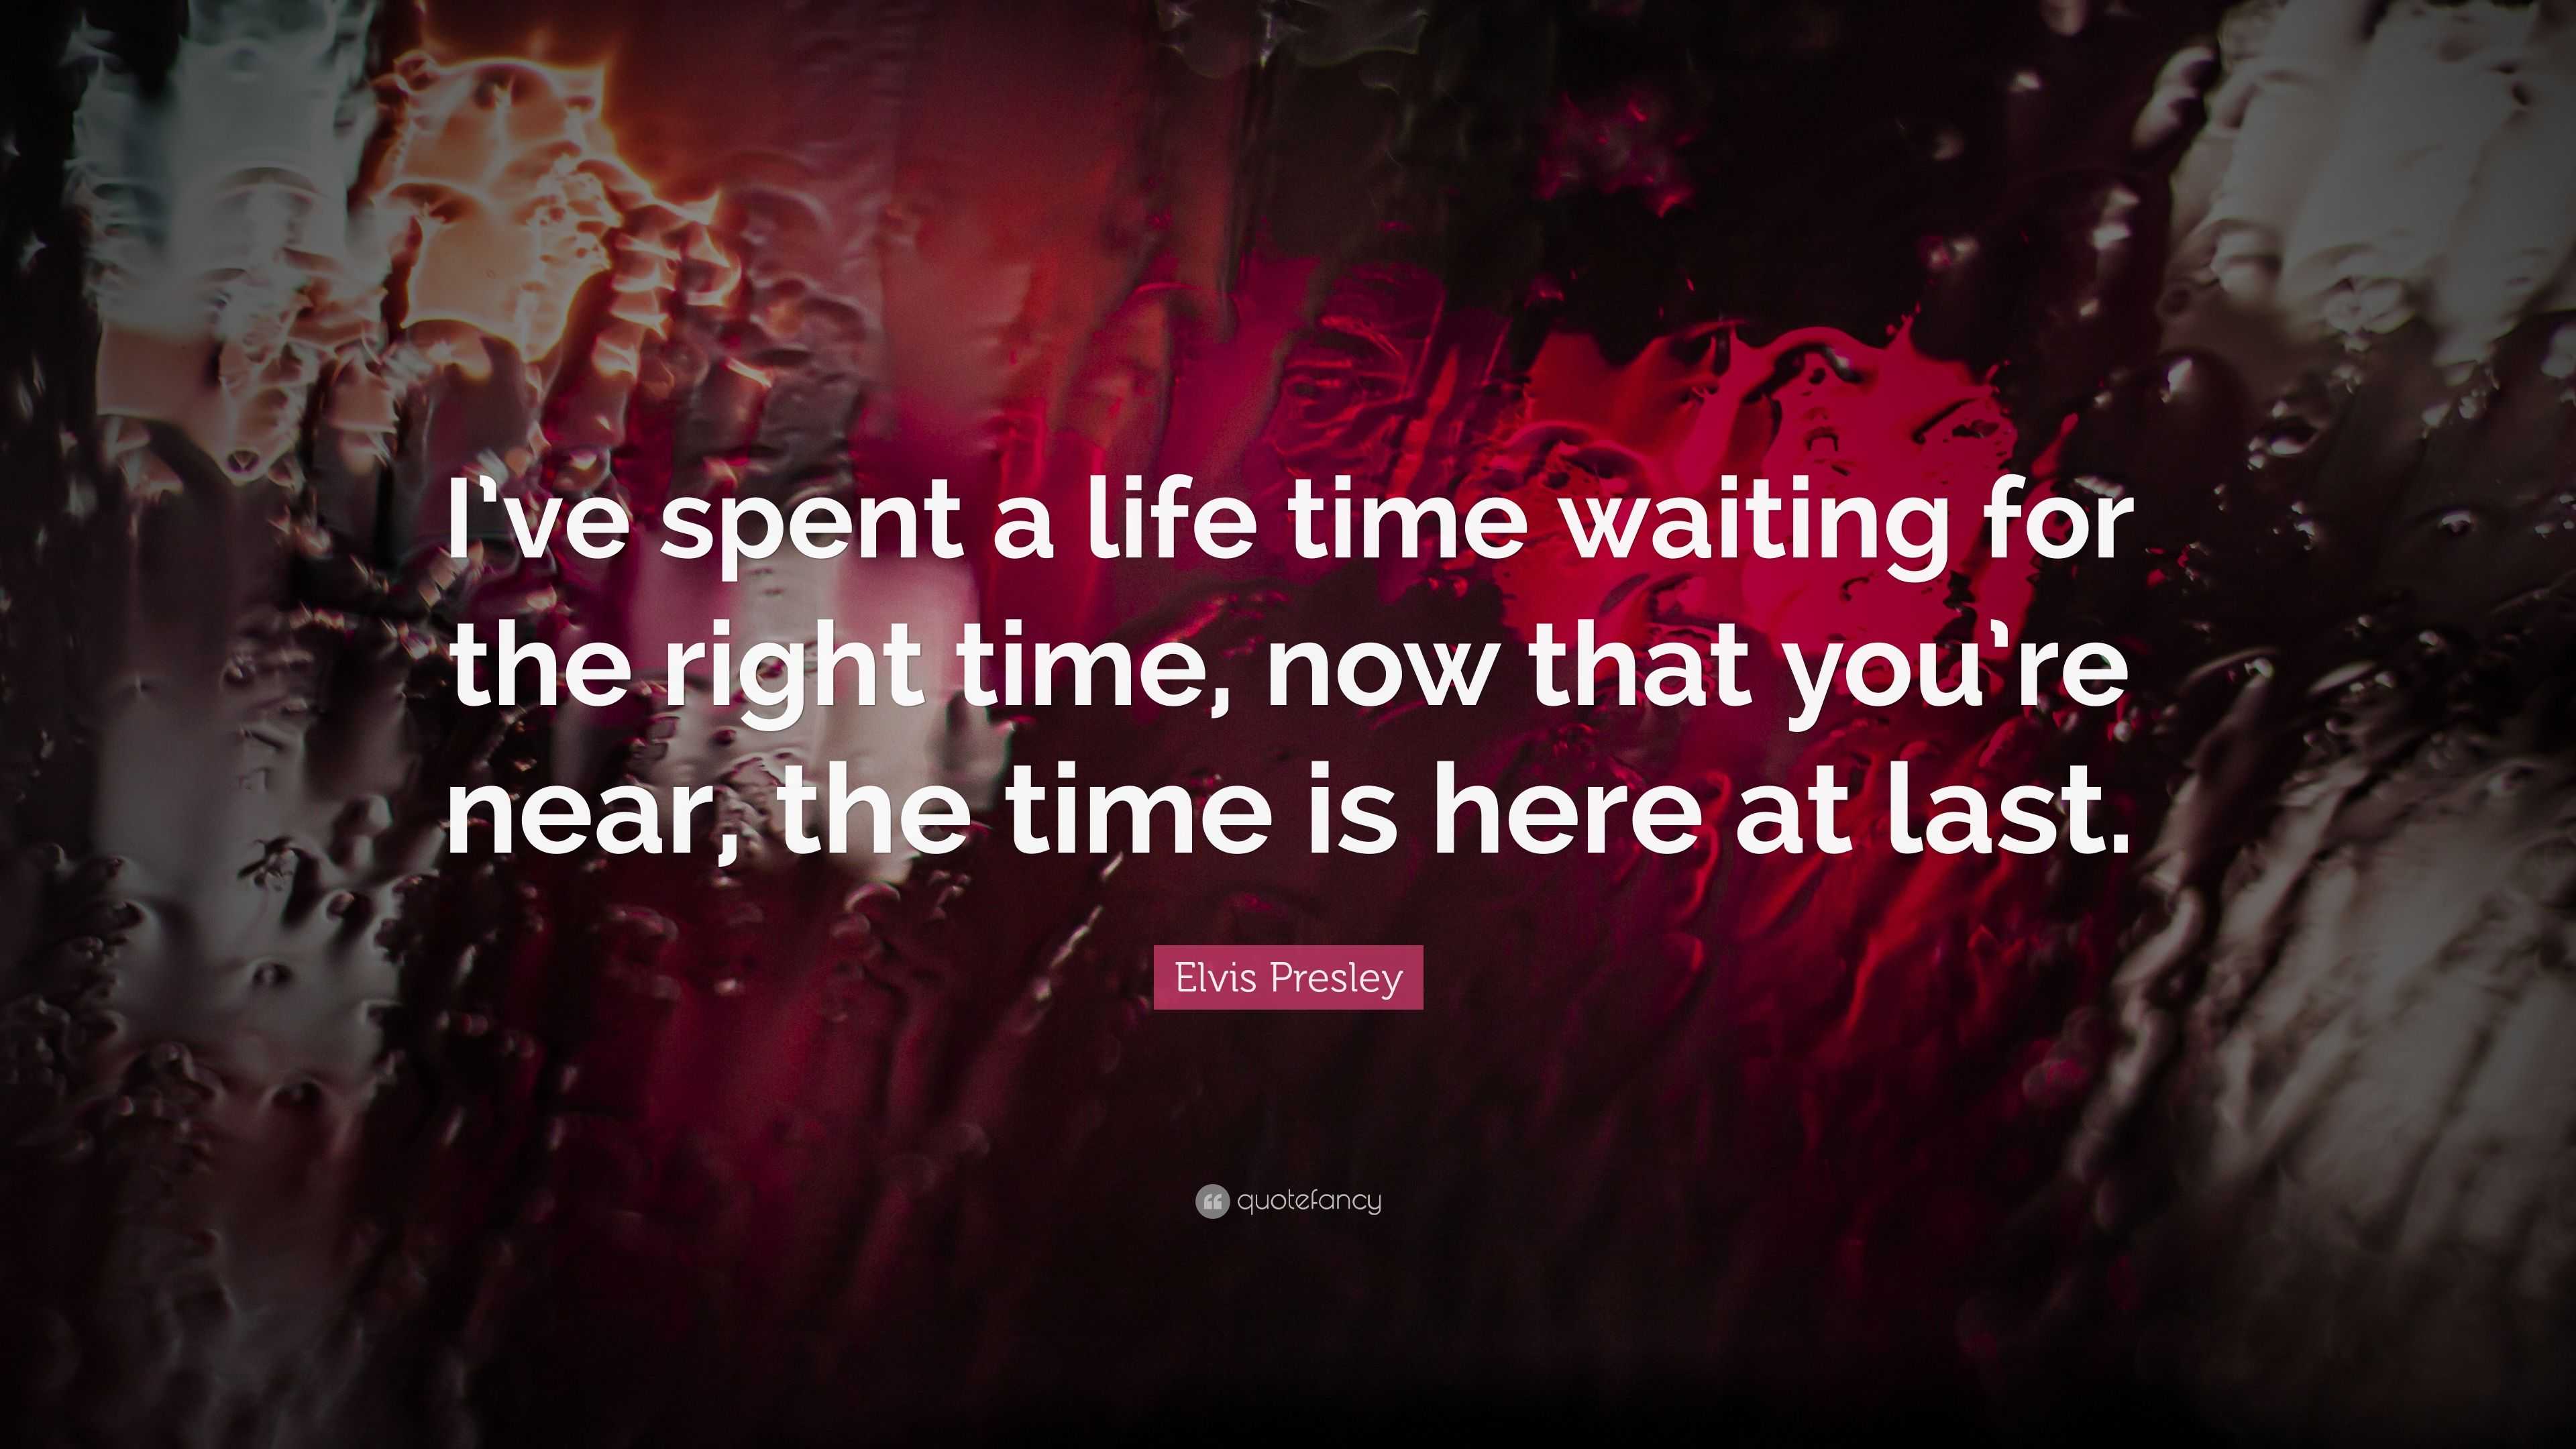 Elvis Presley Quote “I ve spent a life time waiting for the right